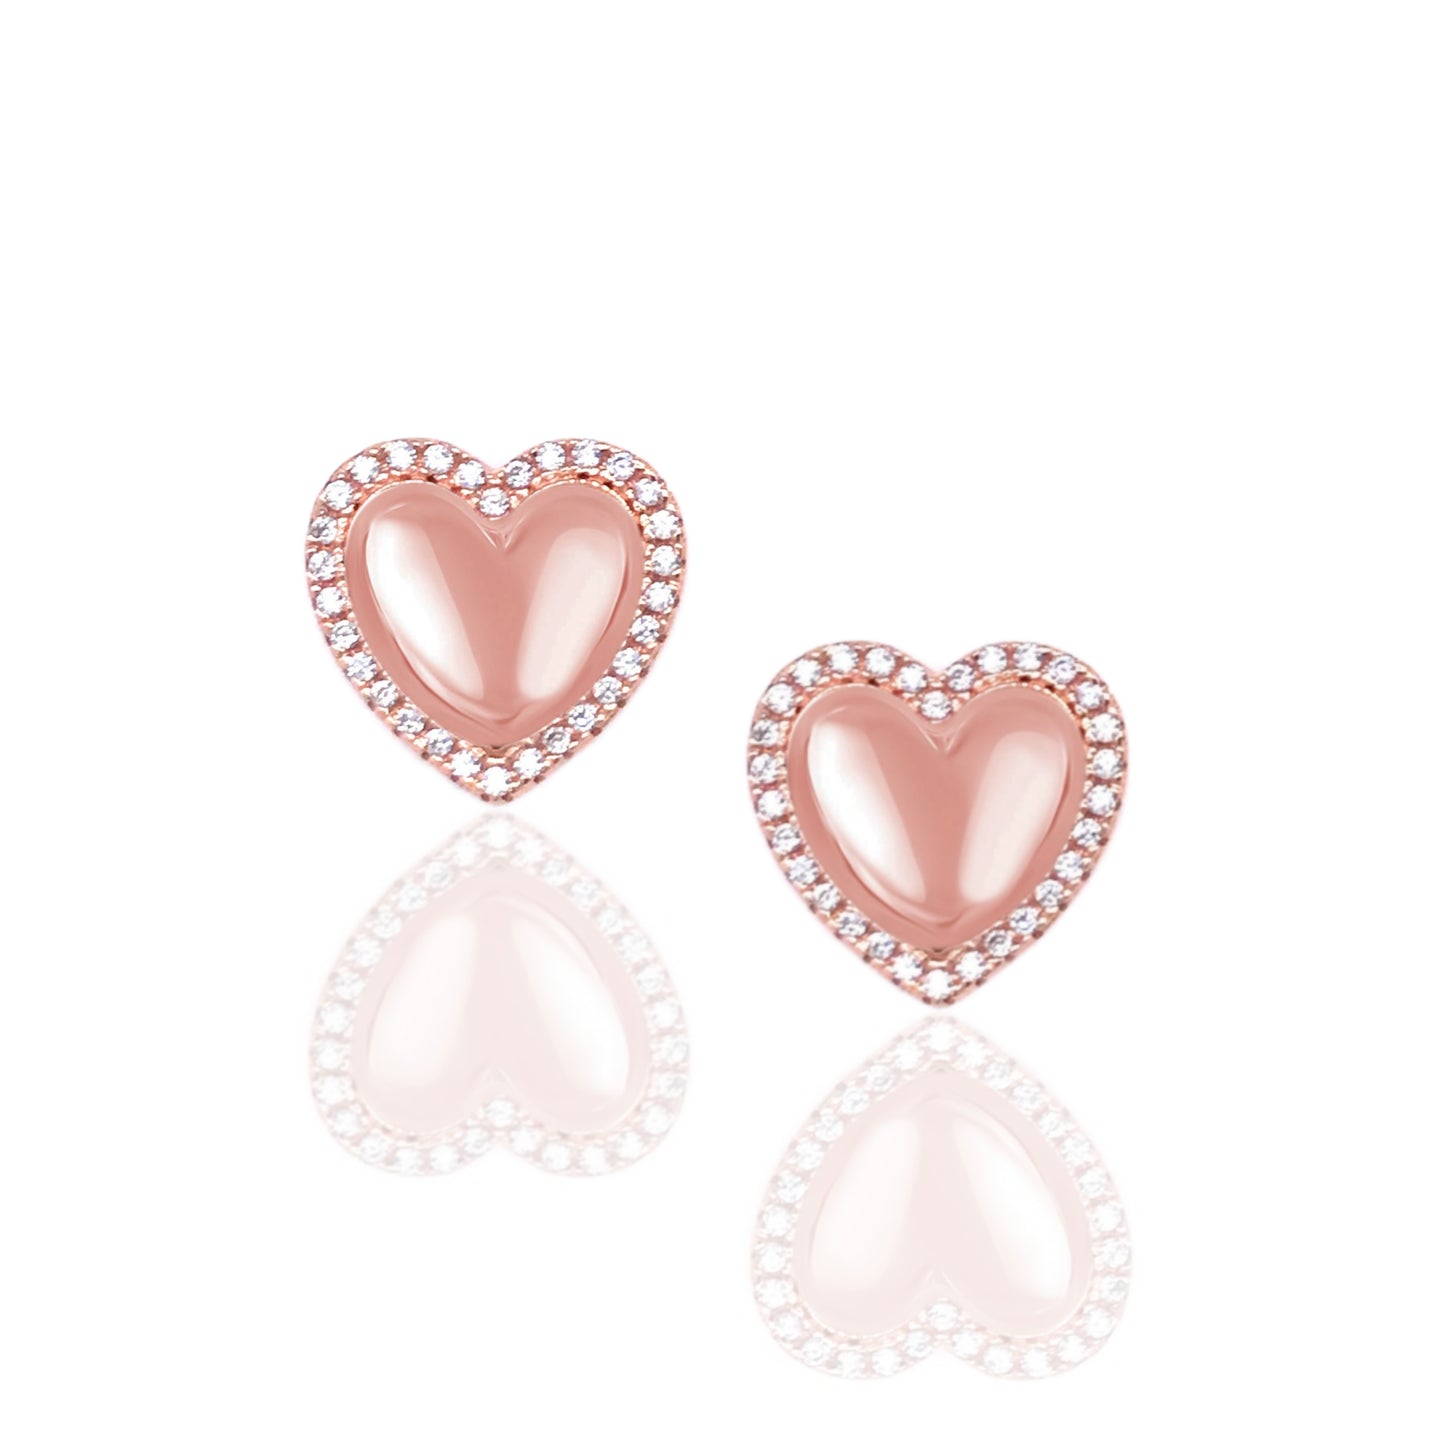 Rose Gold Plated Sterling Silver Heart Stud Earrings Outlined in Micropave CZs - HK Jewels